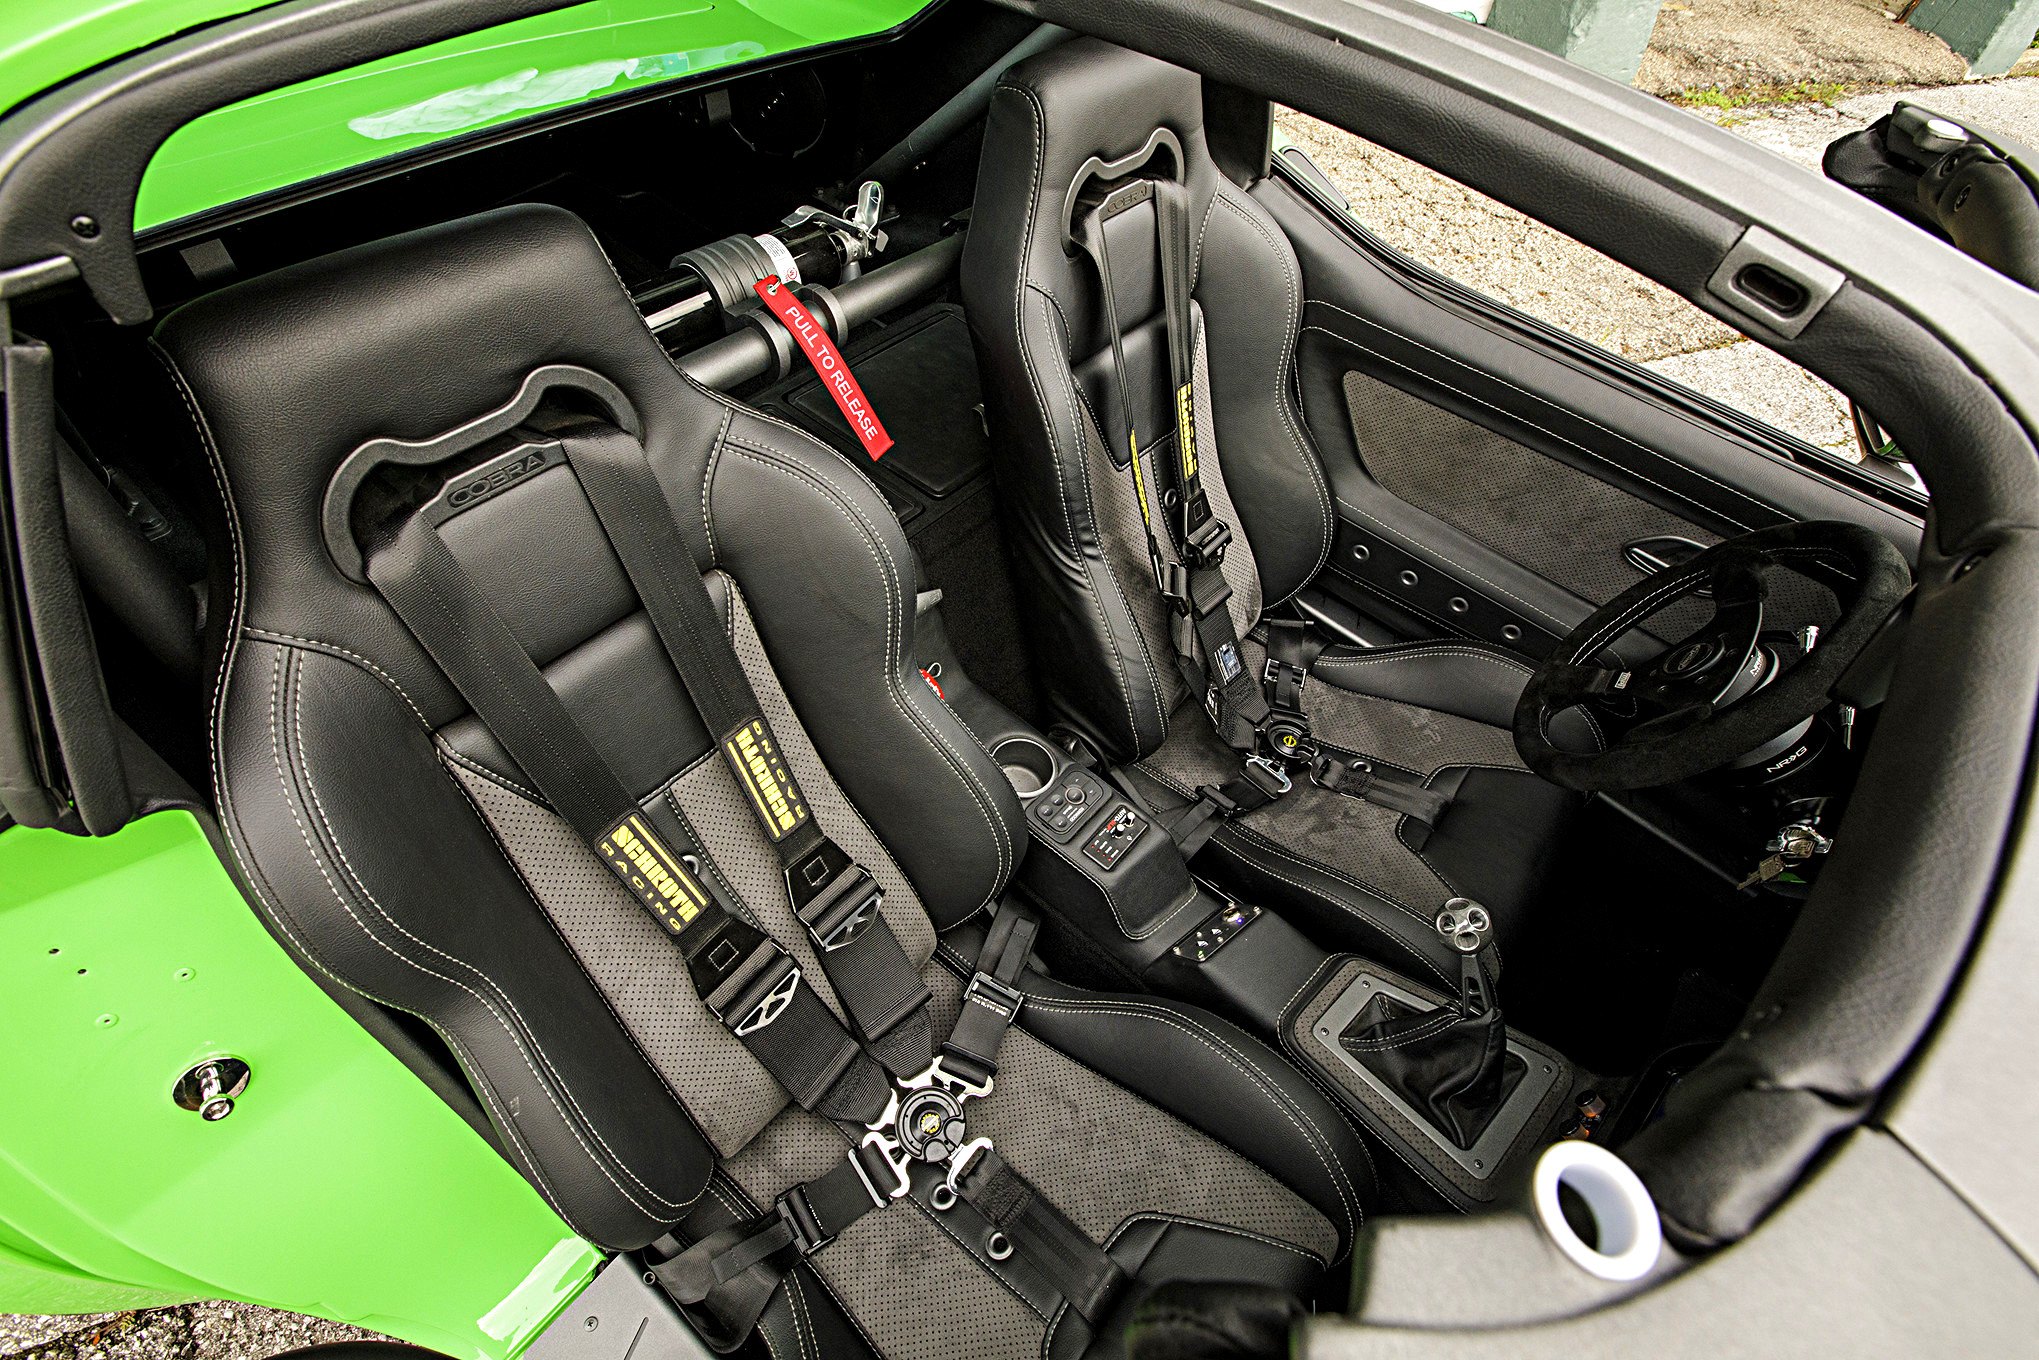 Cobra Racing Seats in Green Debadged Chevy Corvette - Photo by Robert McGaffin